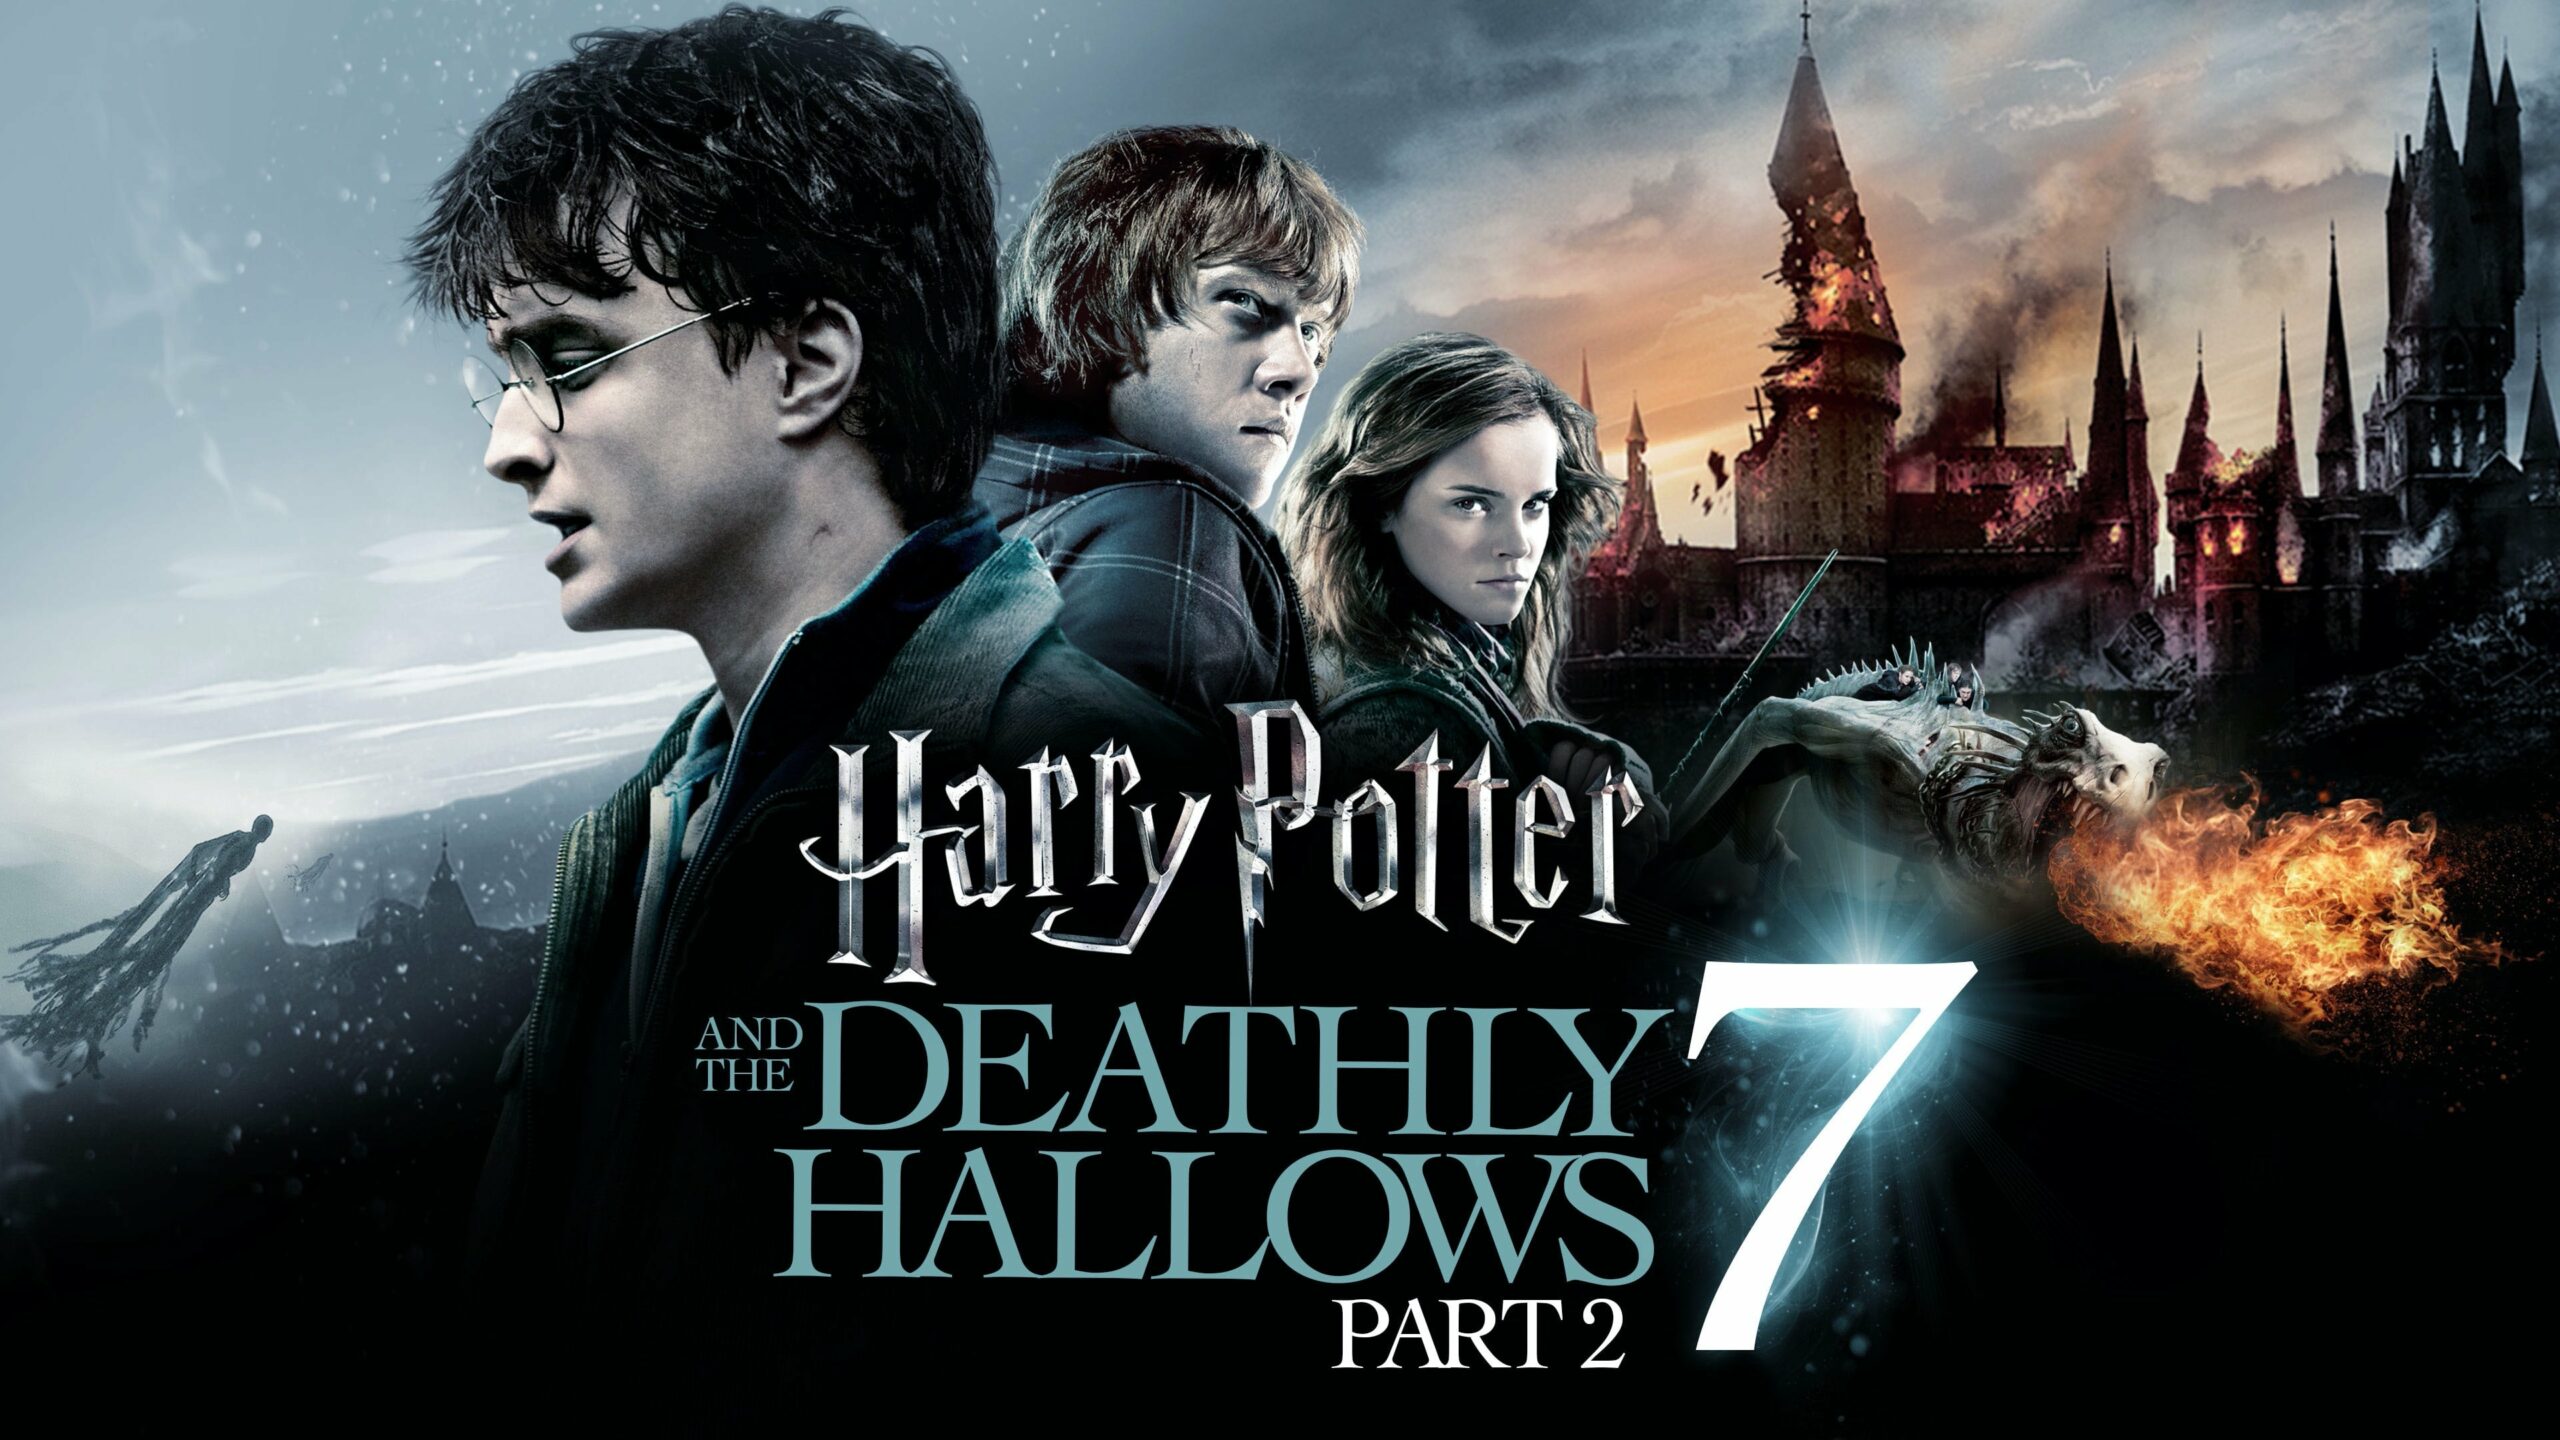 Harry Potter and the Deathly Hallows: Part 2 (2011) - Reqzone.com